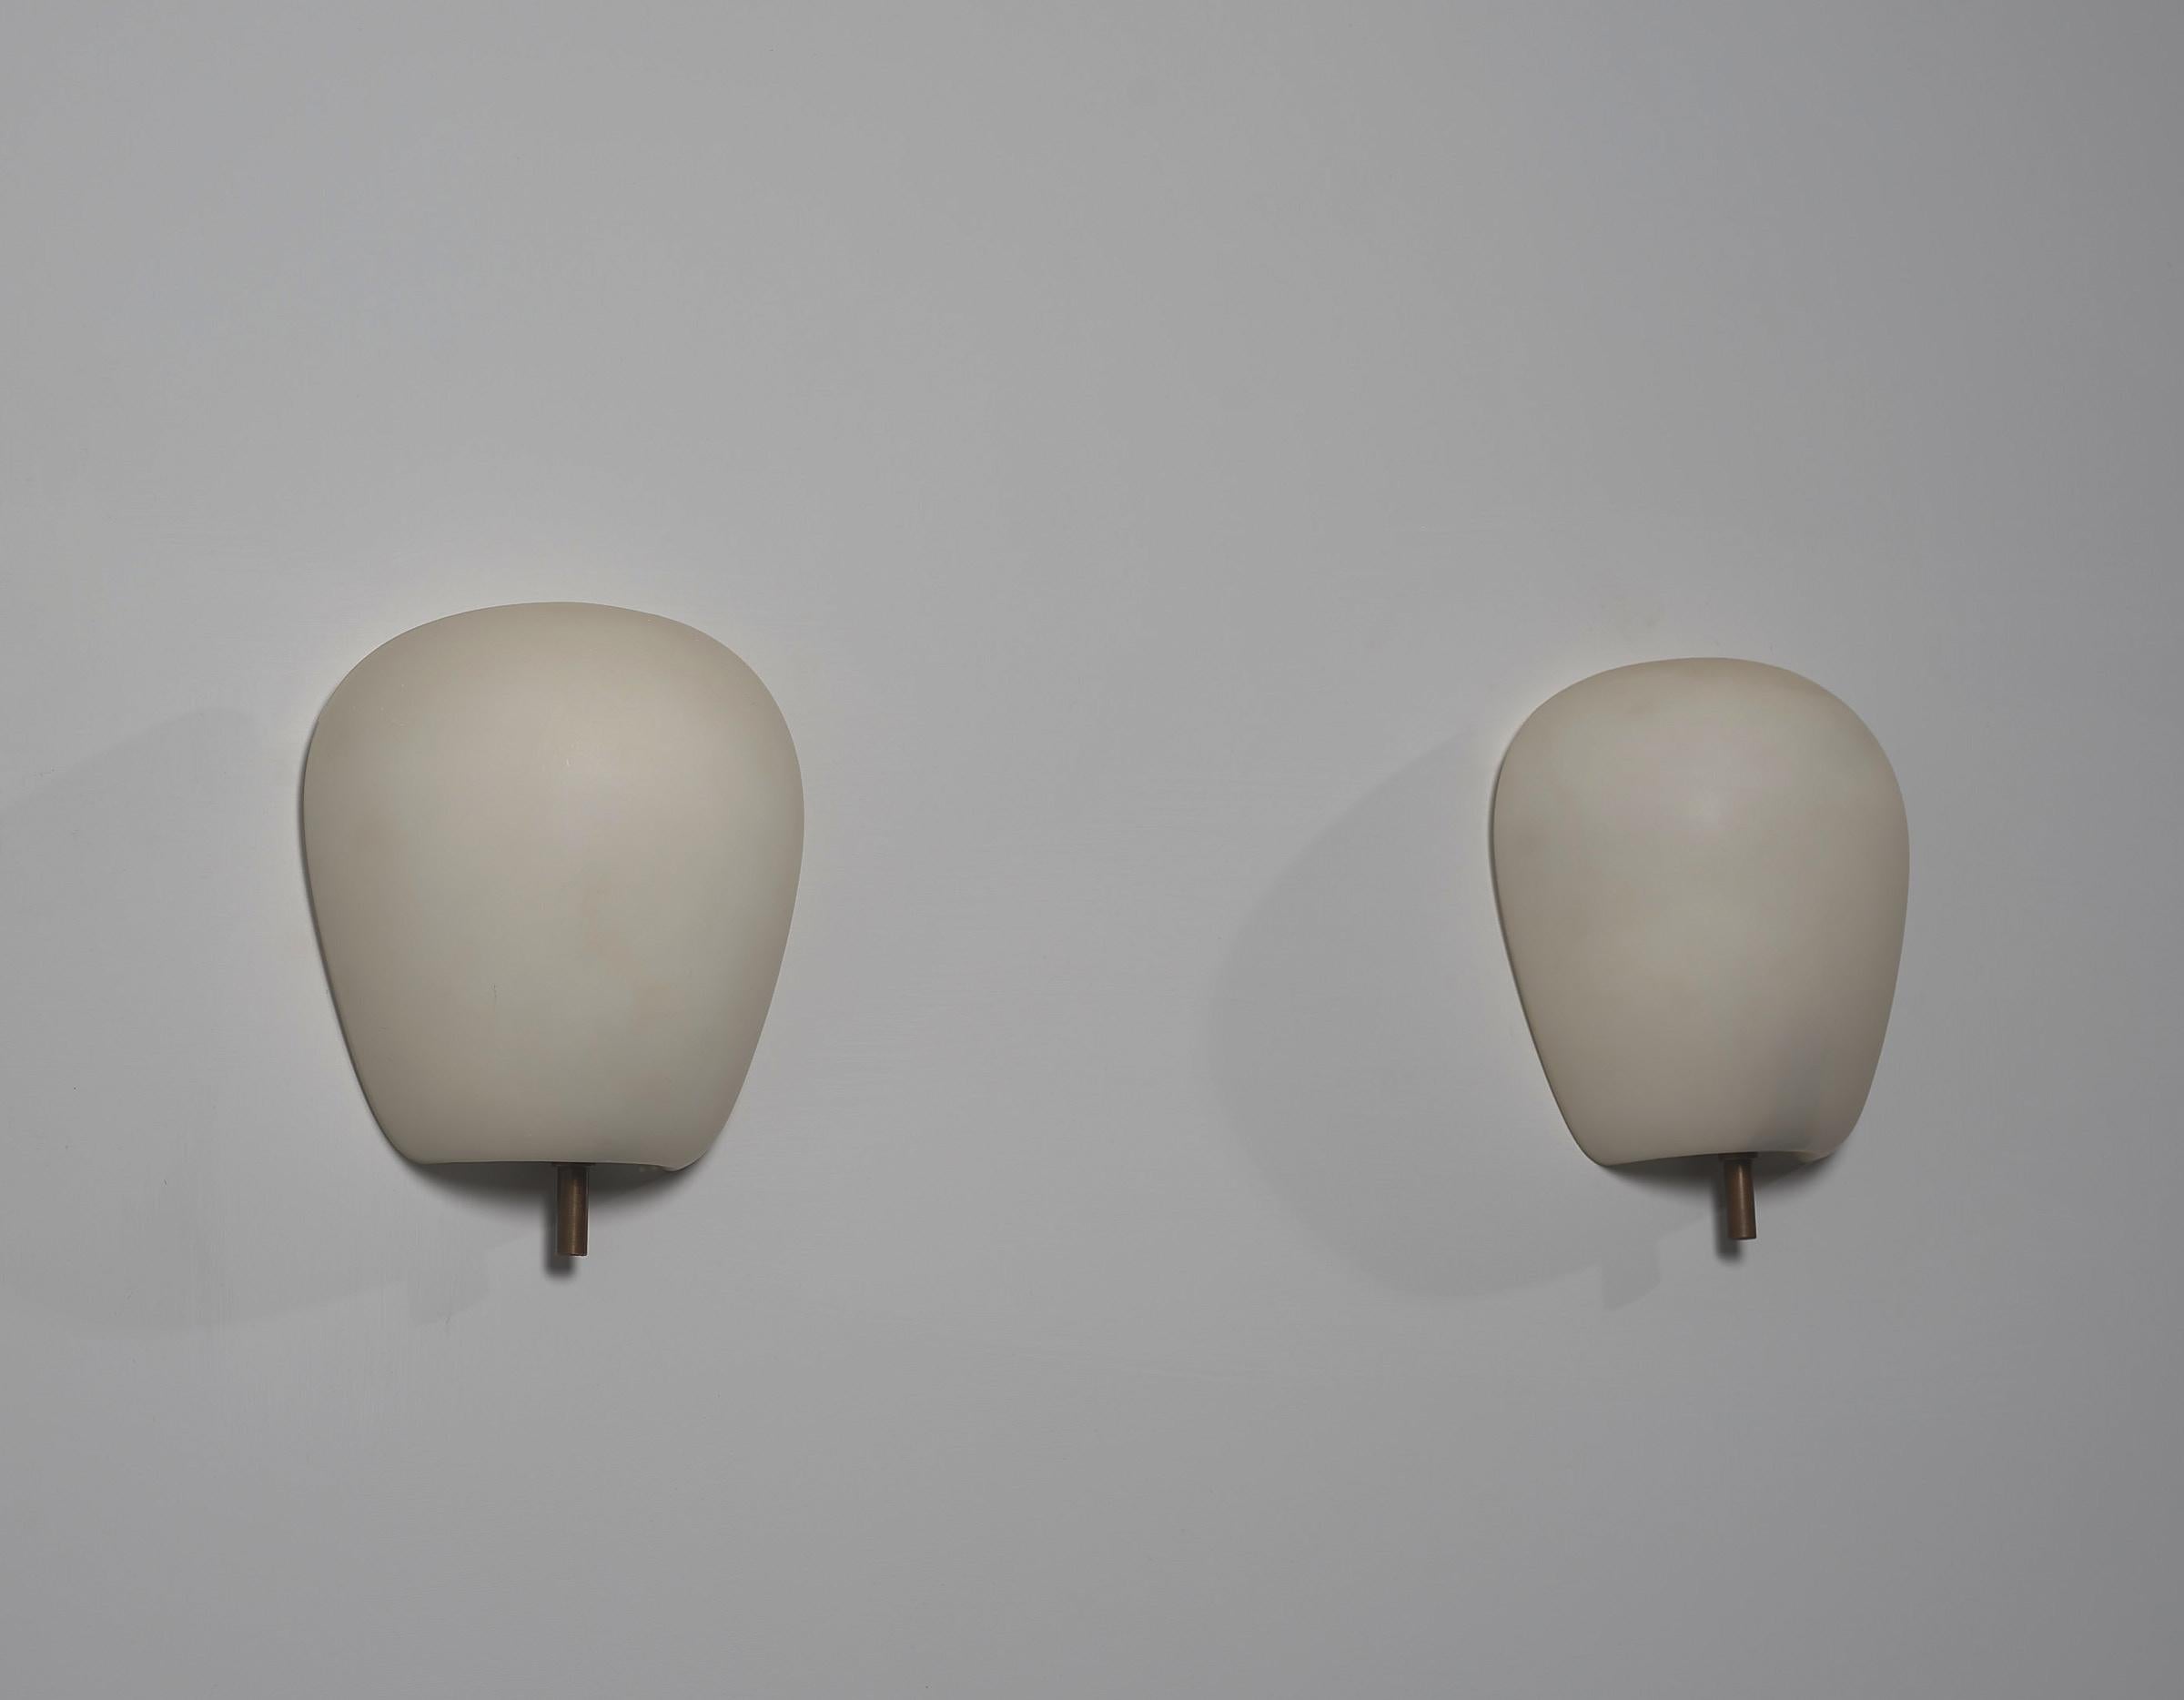 Mid-20th Century Pair of Italian Design Wall Sconces from the 1950s - Fontana Arte Attribution